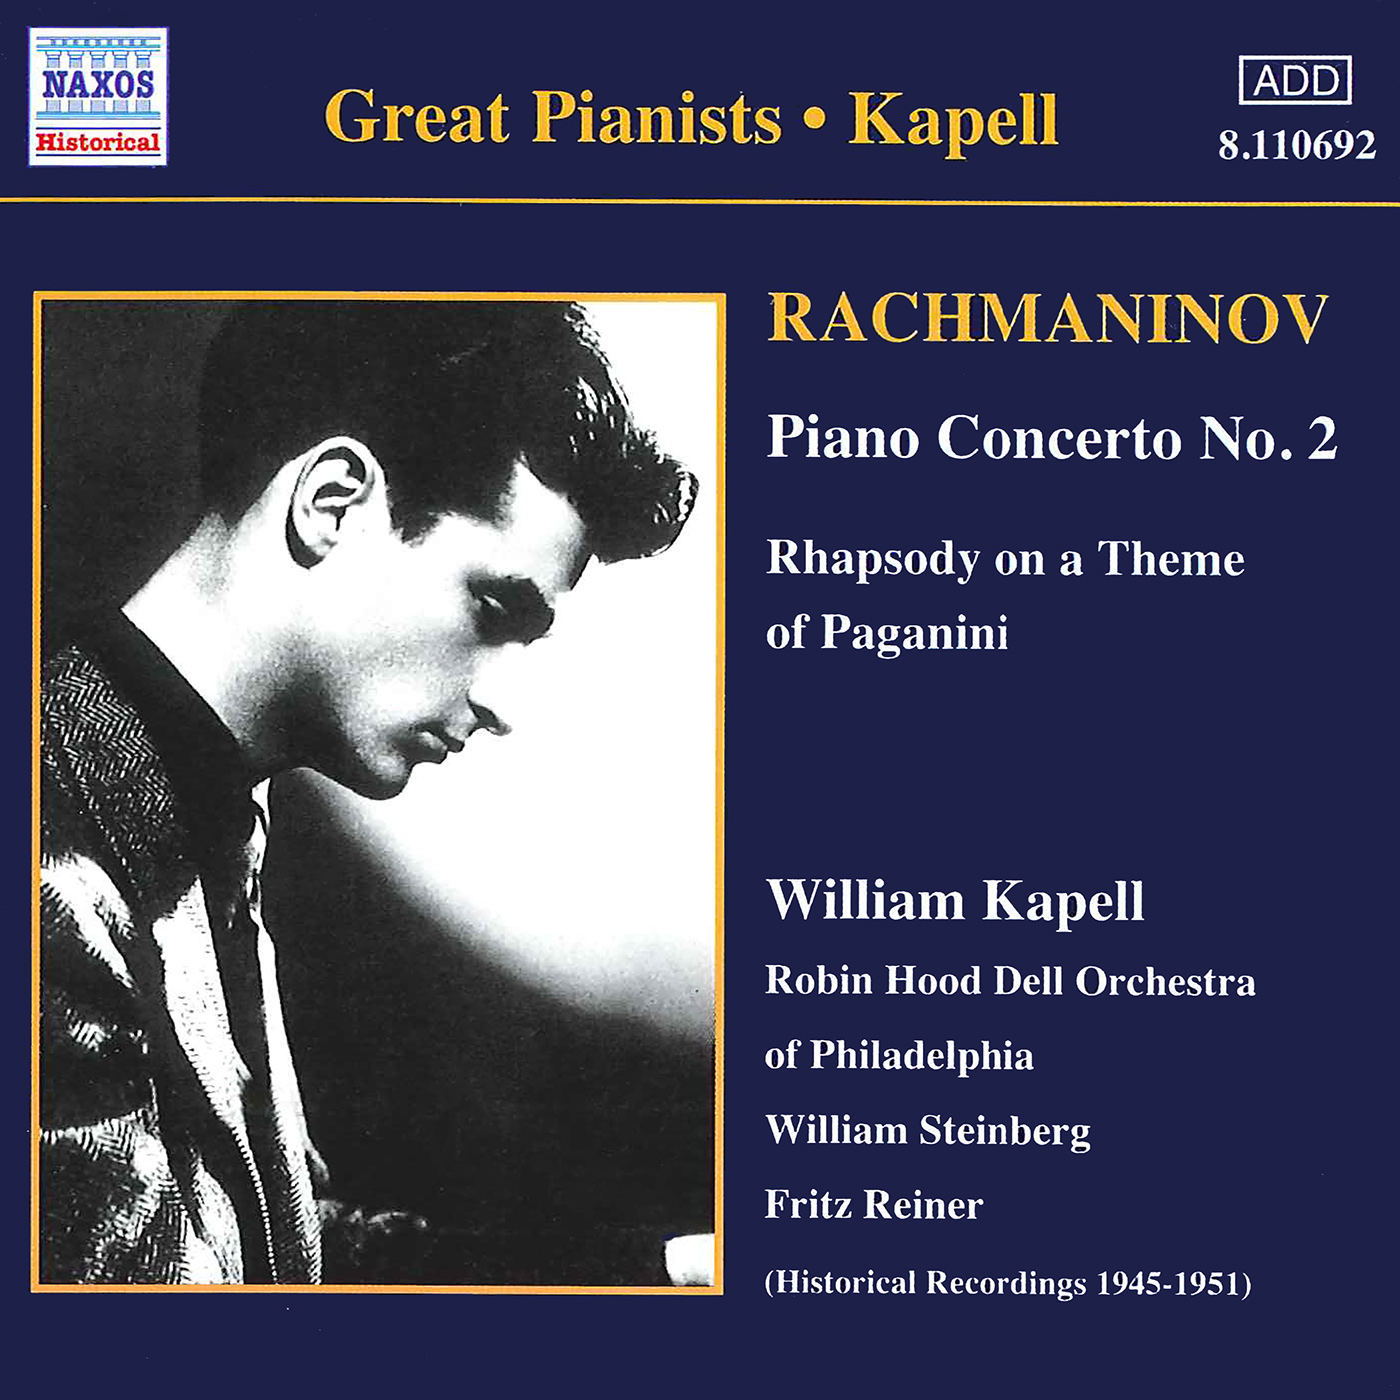 Rhapsody on a Theme of Paganini, Op. 43:Variation XVIII: Andante cantabile